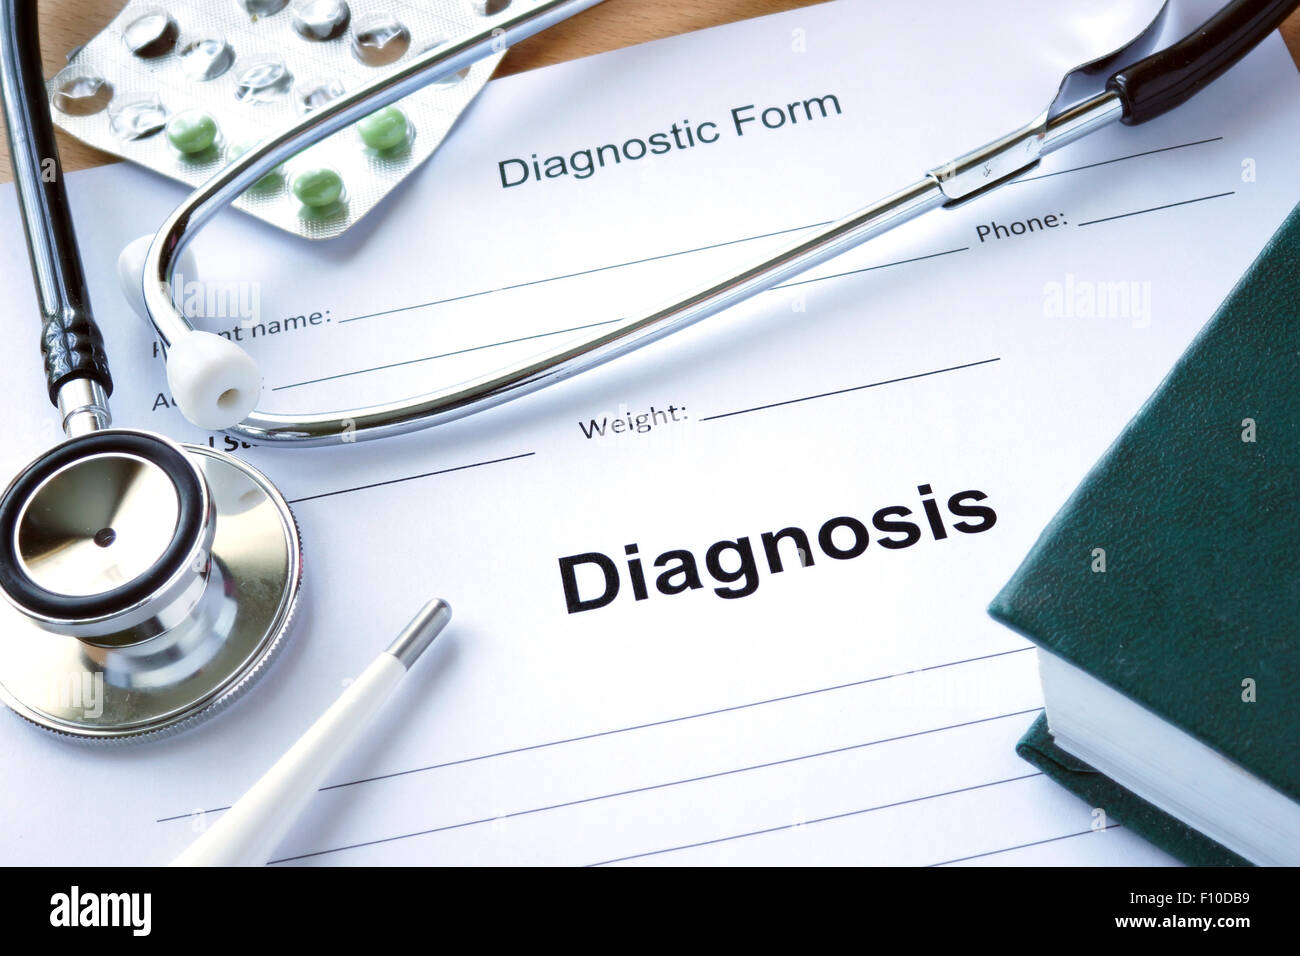 Diagnistic form with Diagnosis and stethoscope. Medicine concept. Stock Photo